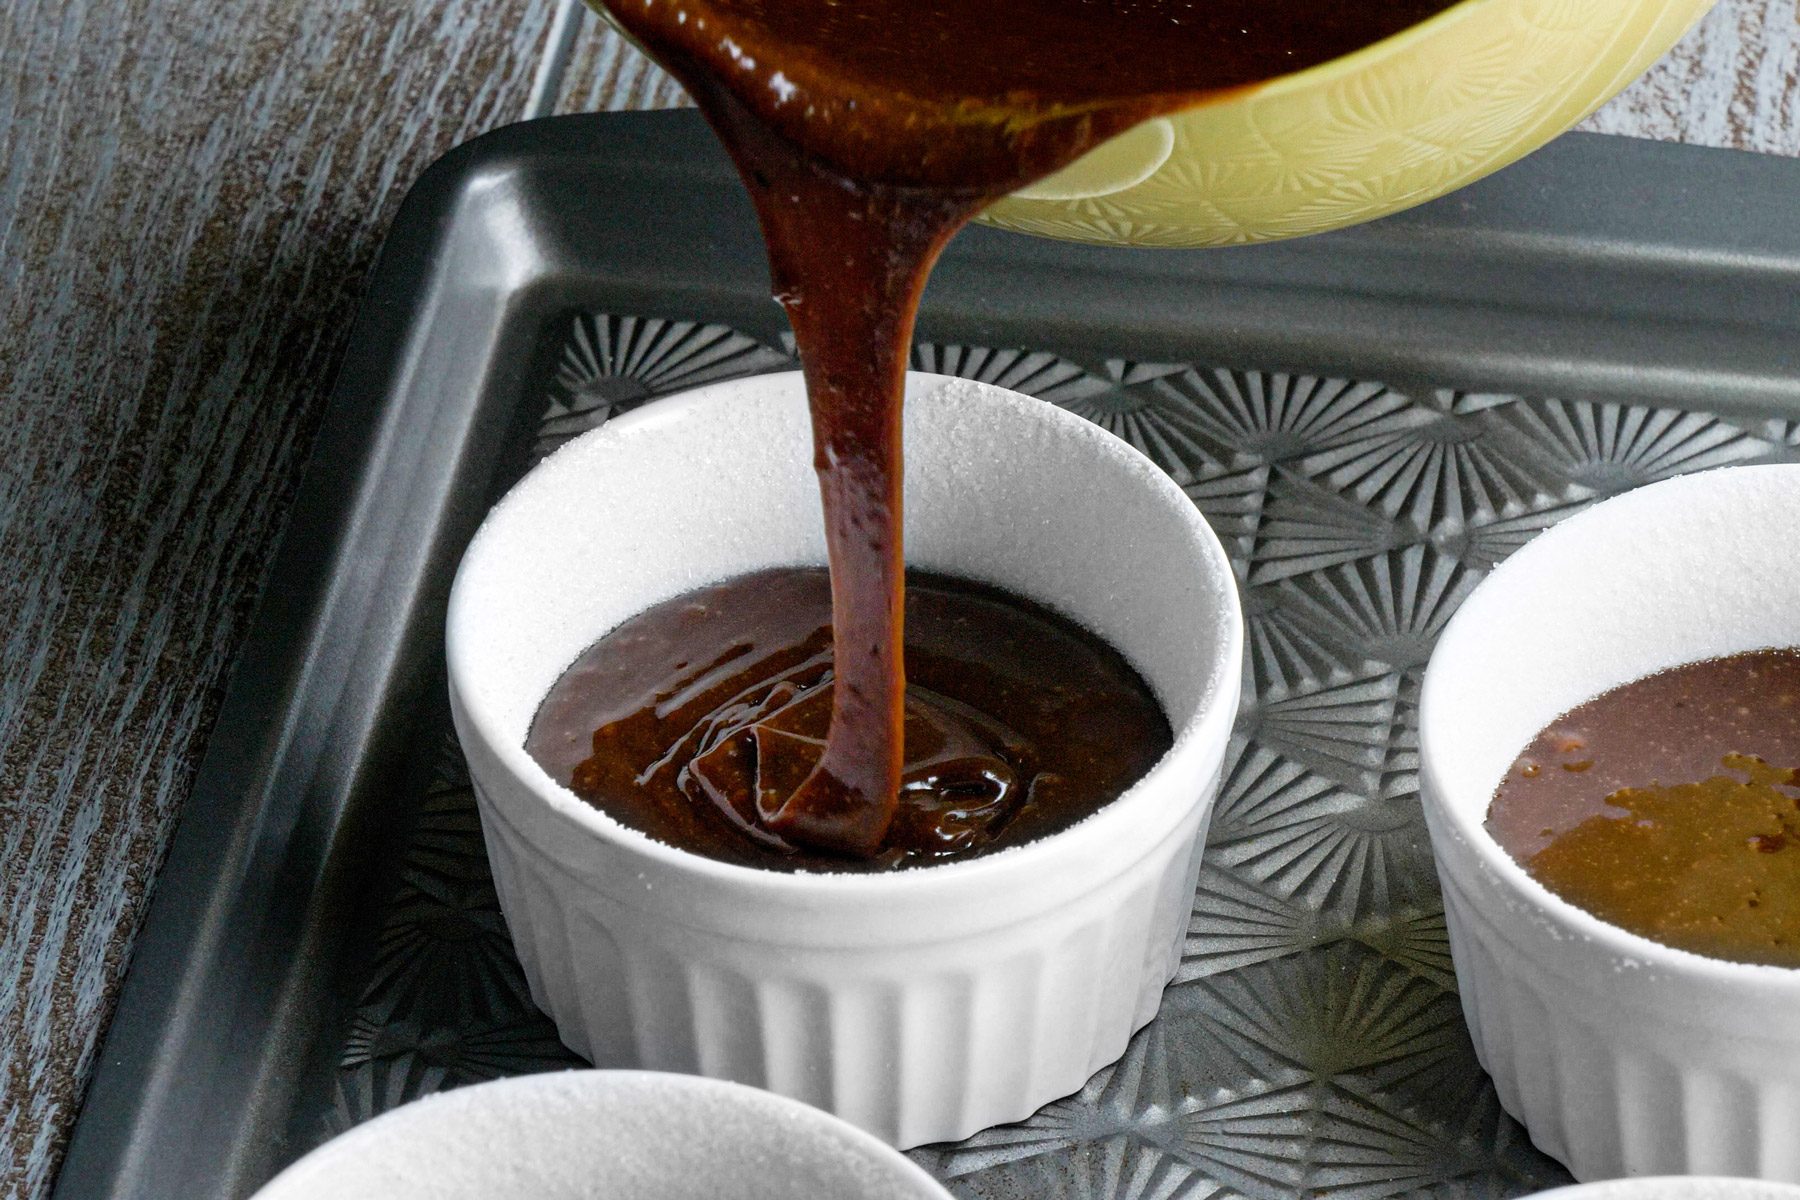 Melted chocolate being poured into a small white dish